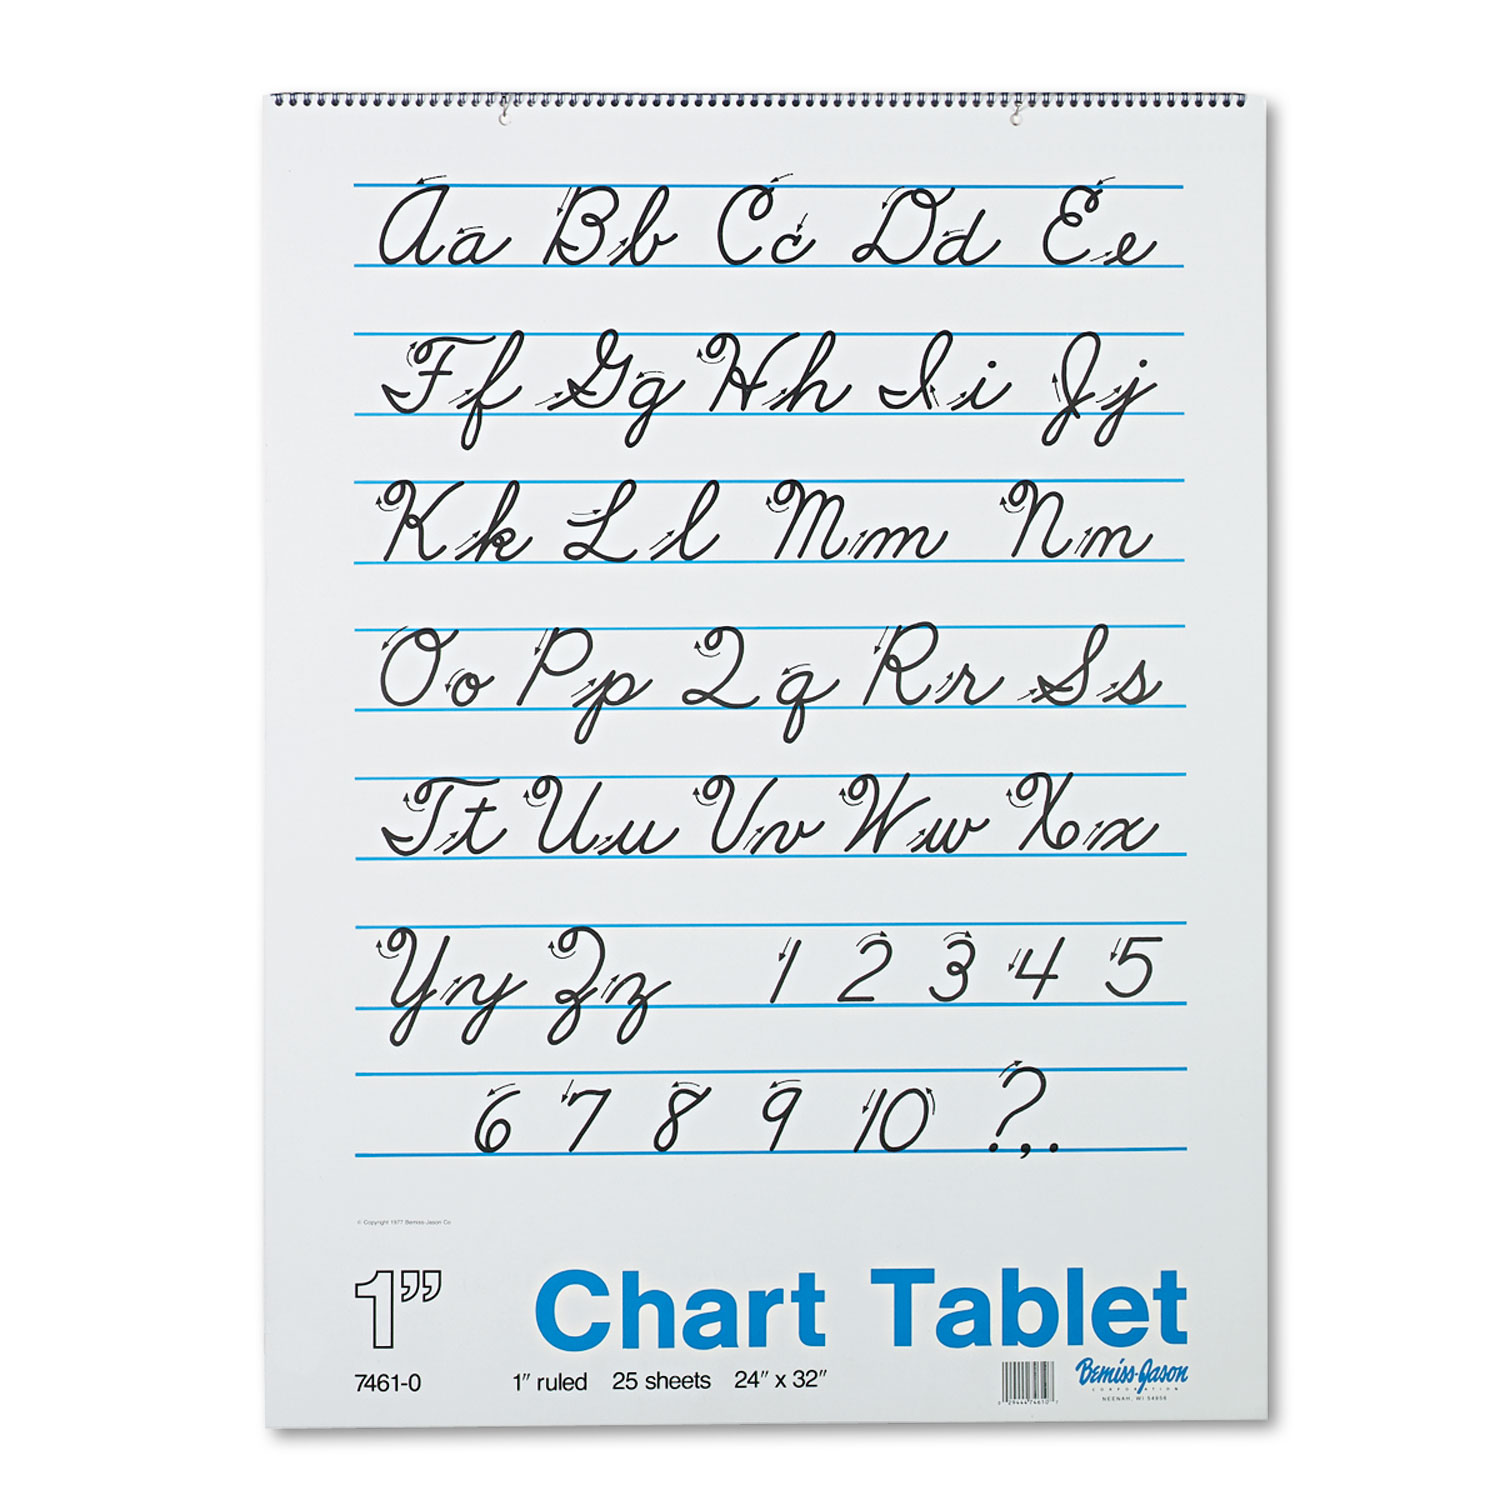  Pacon 74610 Chart Tablets, 1 Presentation Rule, 24 x 32, 25 Sheets (PAC74610) 